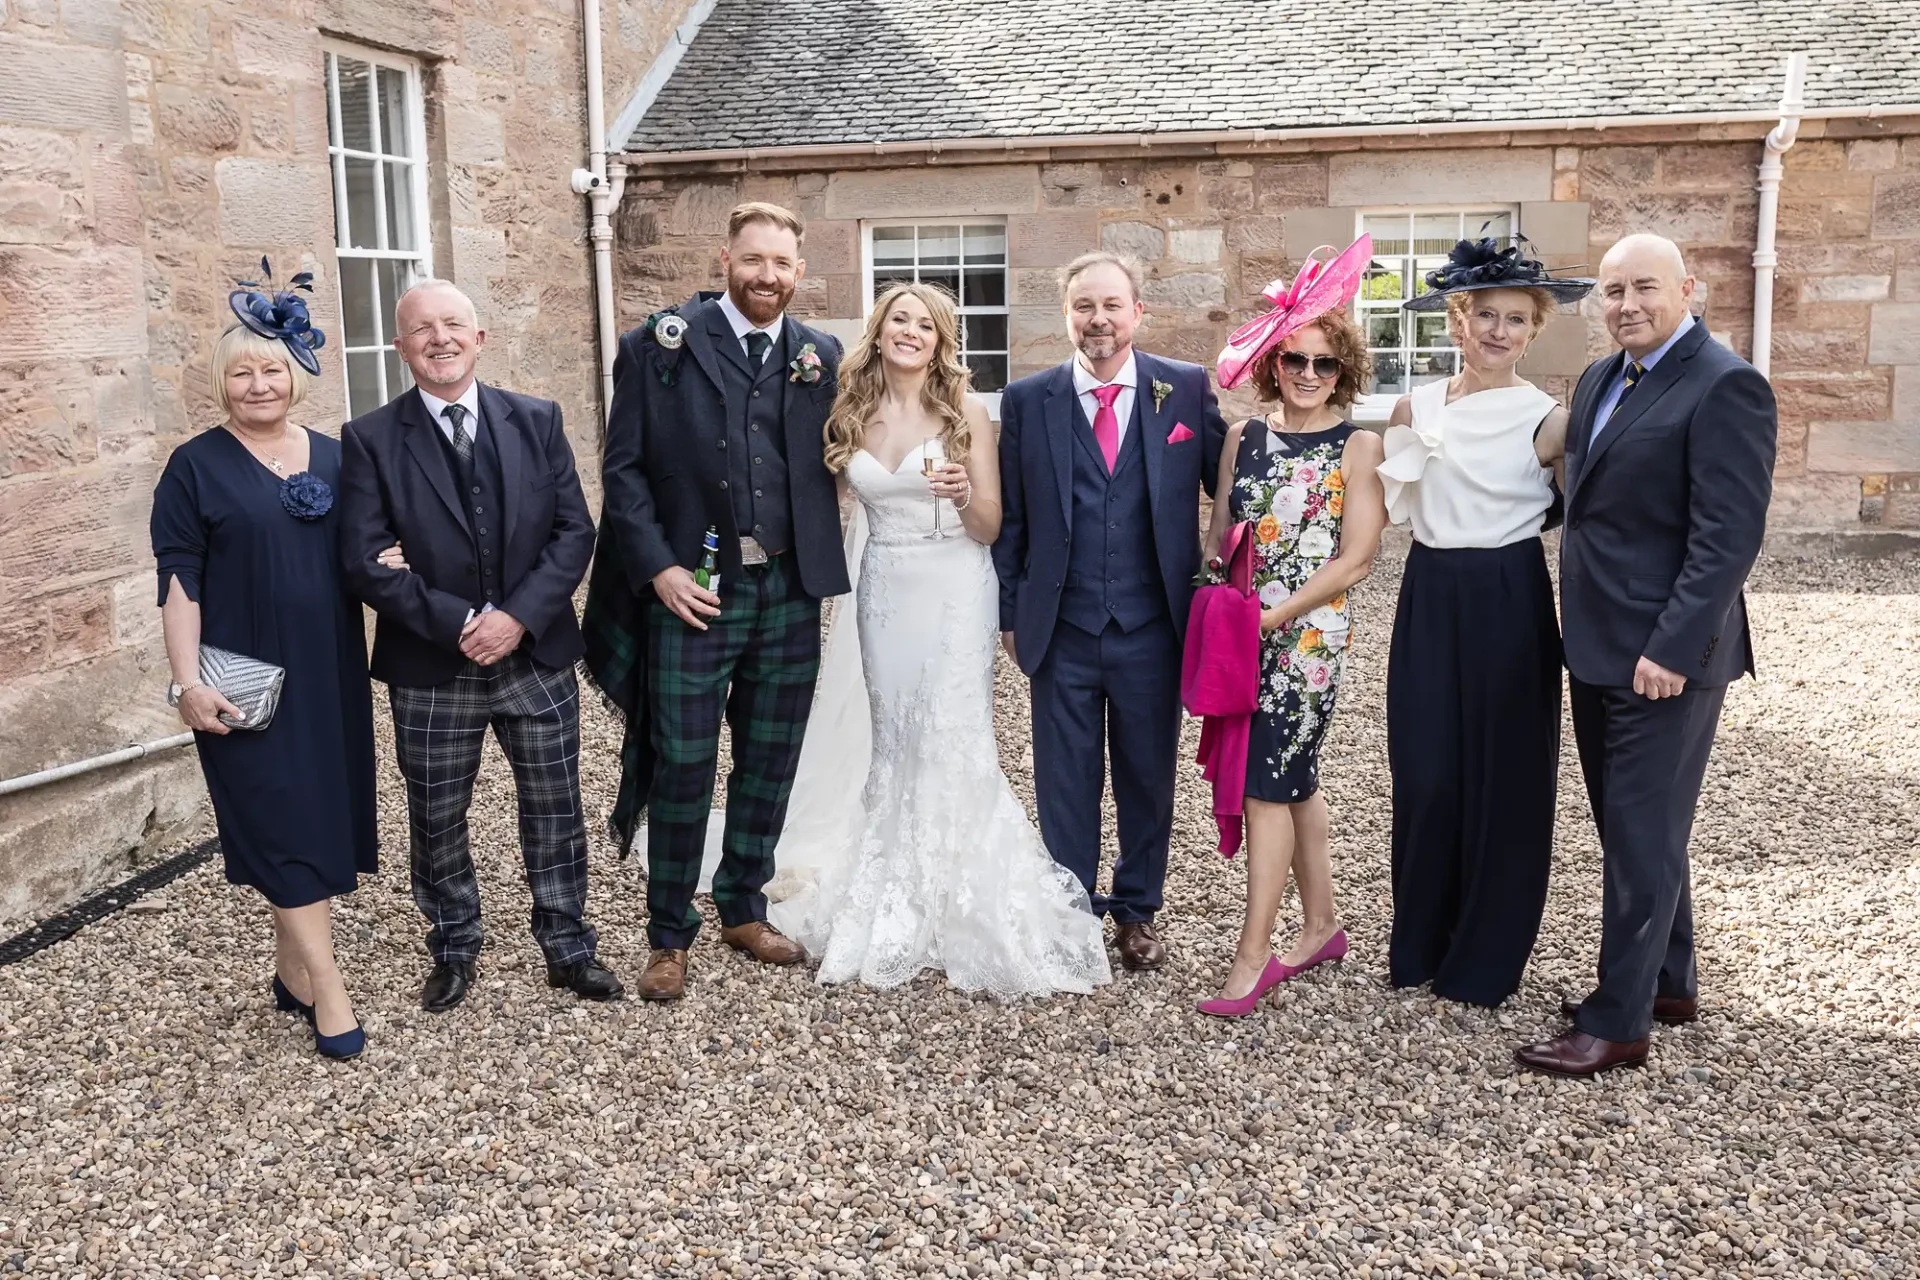 A bride and groom smiling with six guests in formal attire, including kilts and hats, standing in front of a stone building.